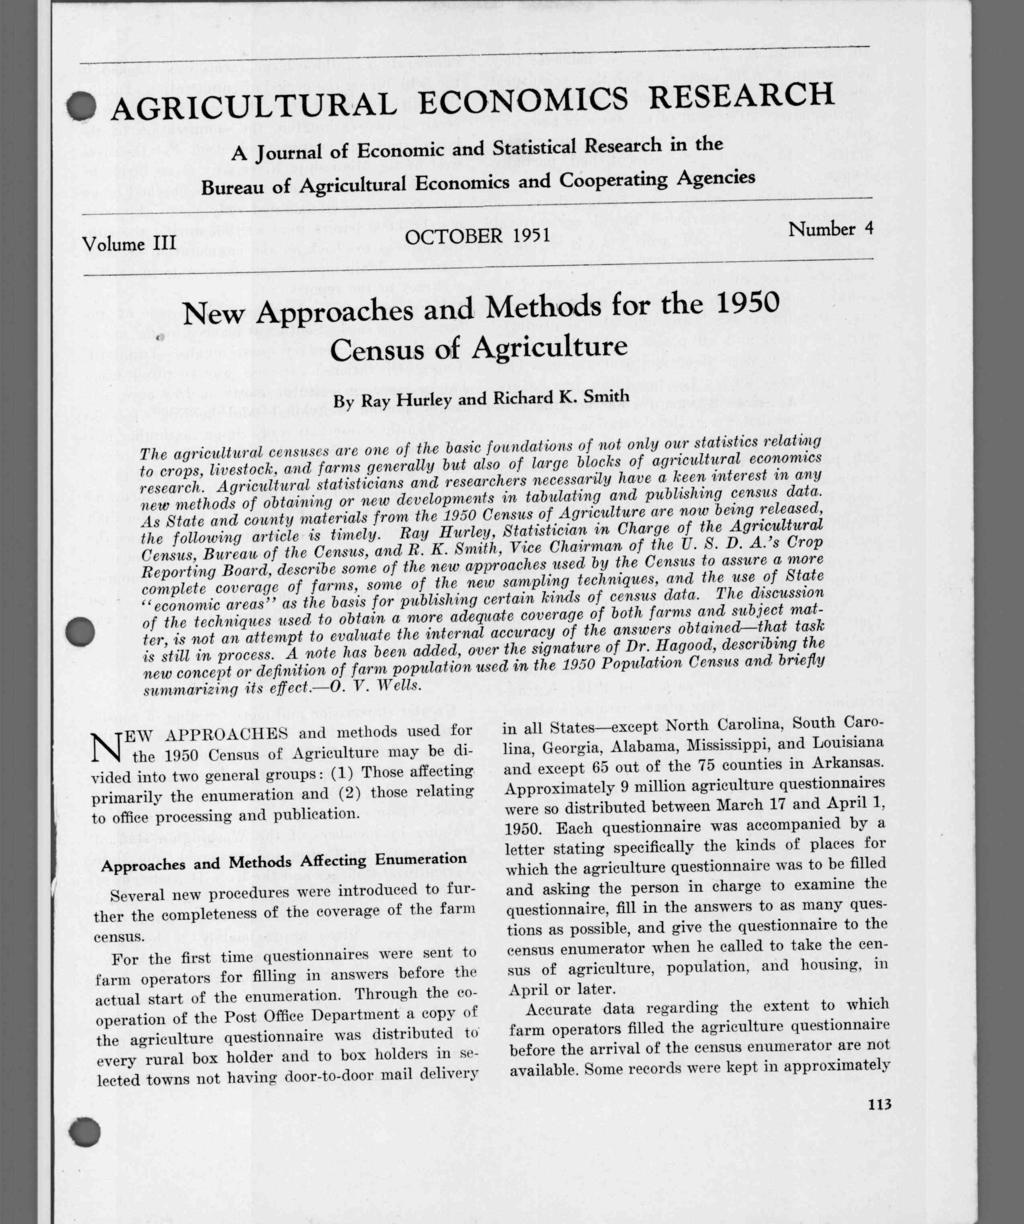 6 AGRICULTURAL ECONOMICS RESEARCH A Journal of Economic and Statistical Research in the Bureau of Agricultural Economics and Cooperating Agencies Volume III OCTOBER 1951 Number 4 New Approaches and